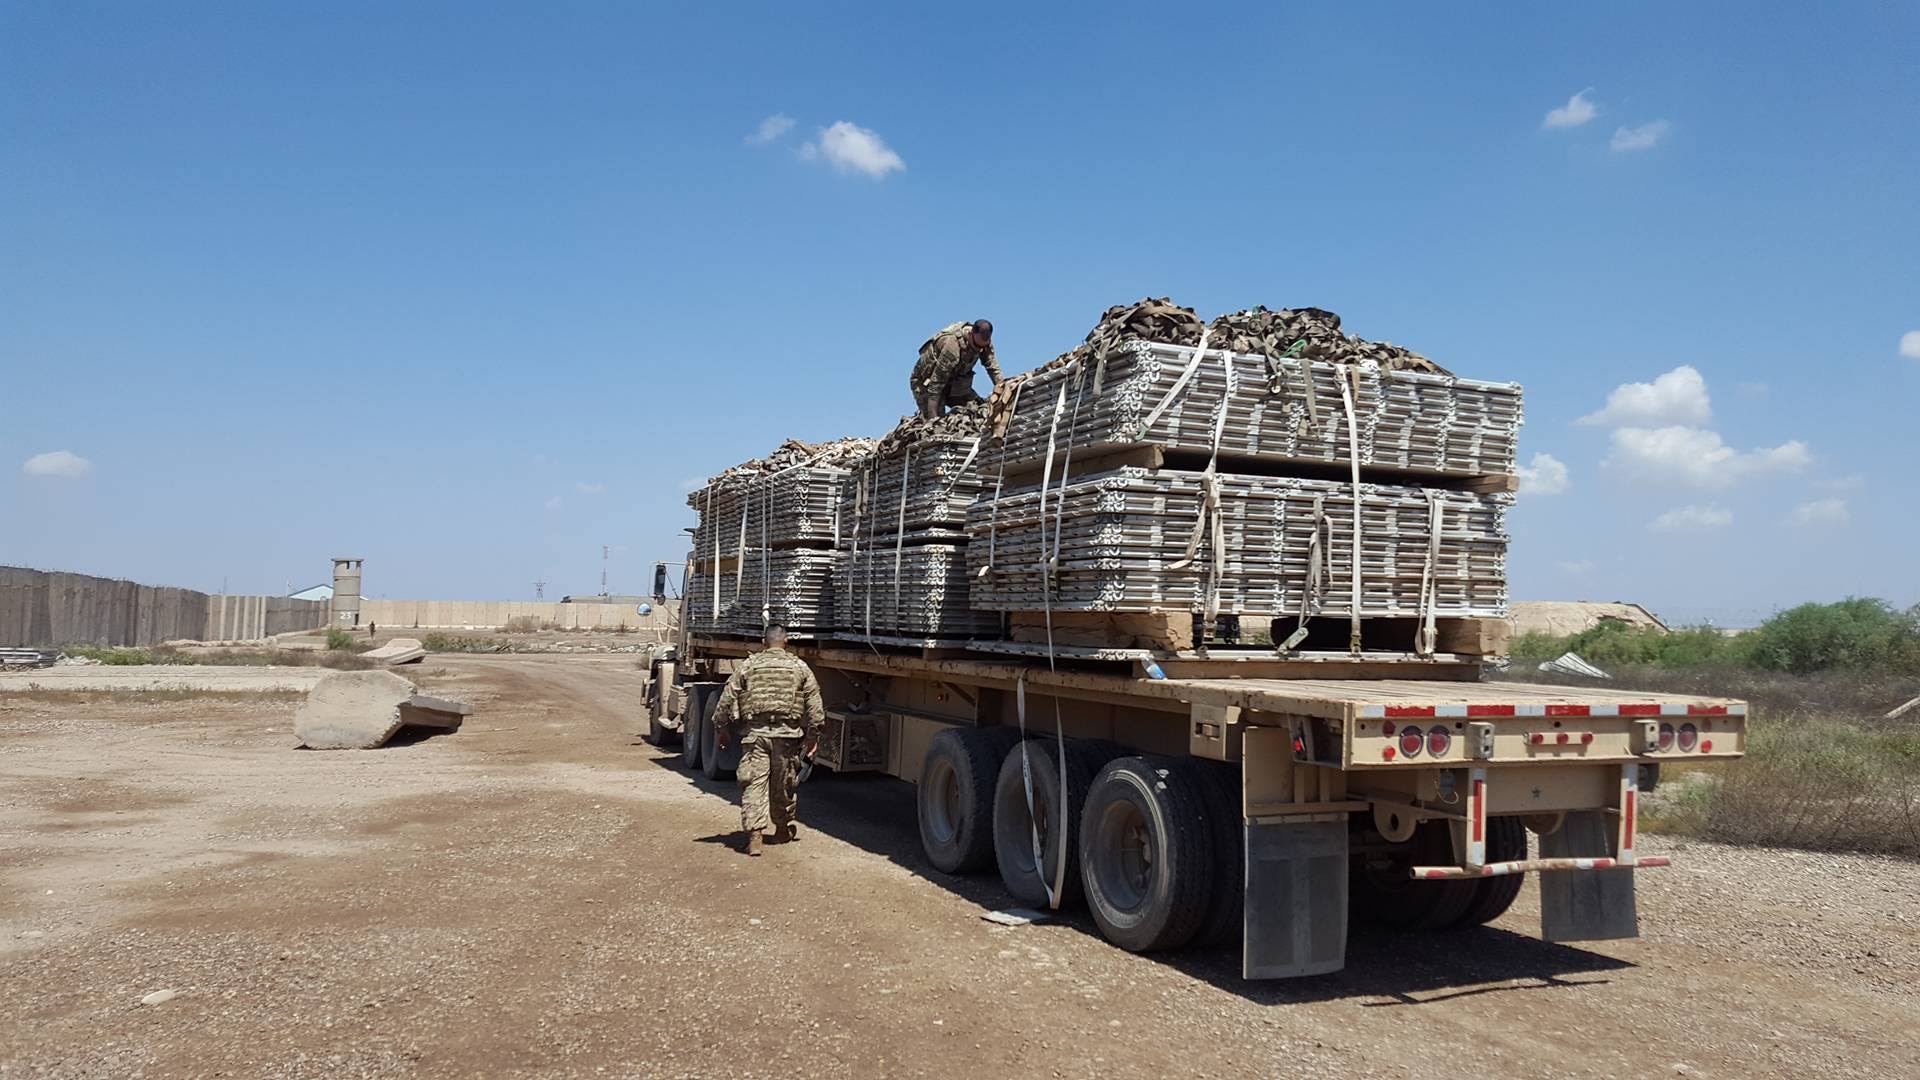 Members of the U.S. Army 574th Combat Support Command secure a load of recovered 463L pallets onto an U.S. Army truck at Al Muthana Air Base, Iraq, April 16, 2017. The pallet recovery initiative, led by aerial porters at the Baghdad Diplomatic Support Center, Iraq, involved the recovery of more than 1,500 aircraft pallets and 1,600 cargo nets, which were used for foreign military sales cargo destined for the Iraqi military to fight ISIS in Mosul. (U.S. Air Force courtesy photo)